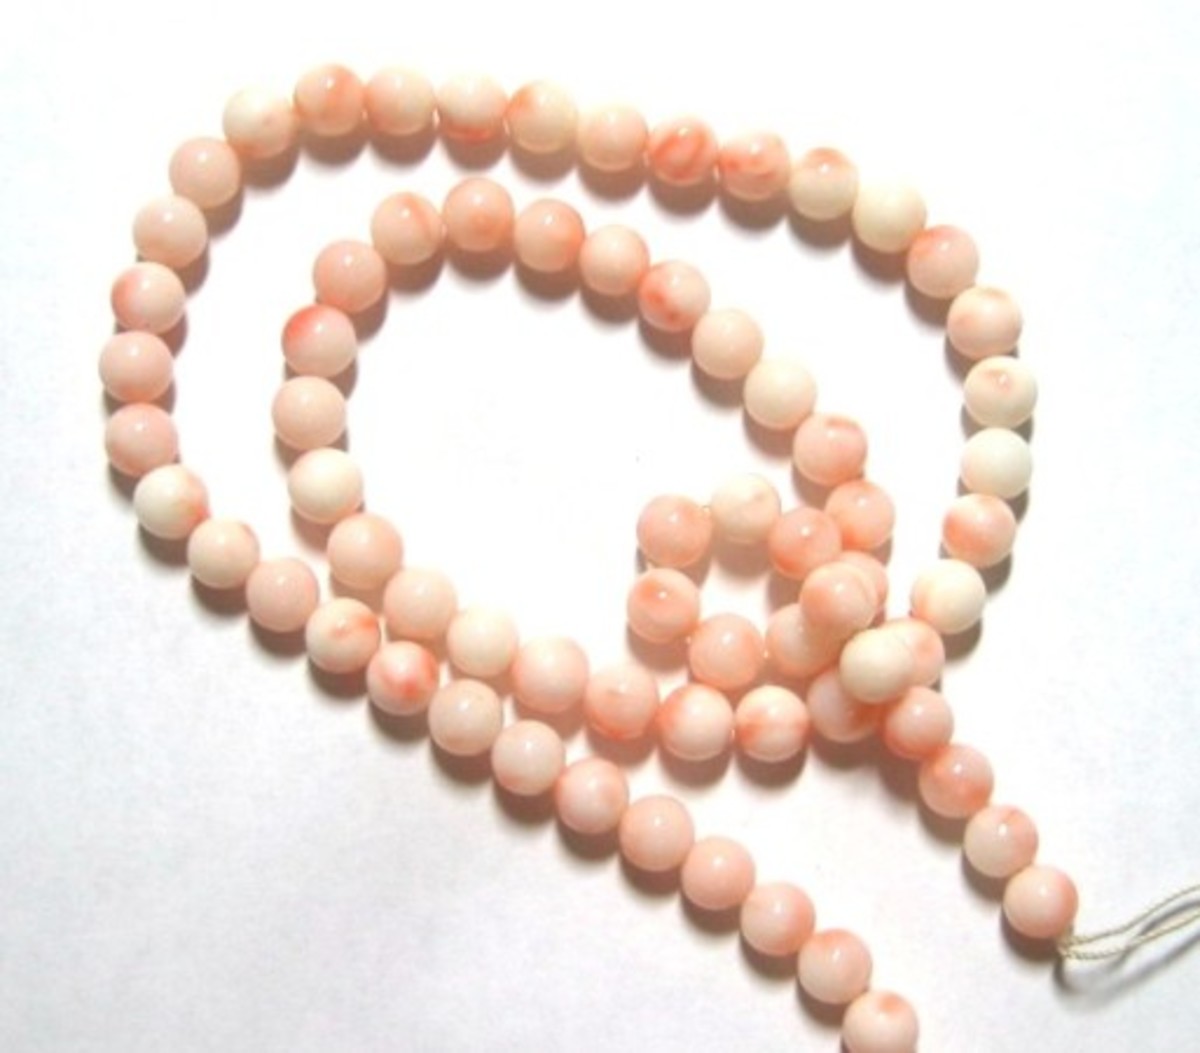 Pink and white coral bead. These are also angel skin coral, but the color is darker and a little more splotchy than the ones on the left. This coral is all natural and has not been dyed.